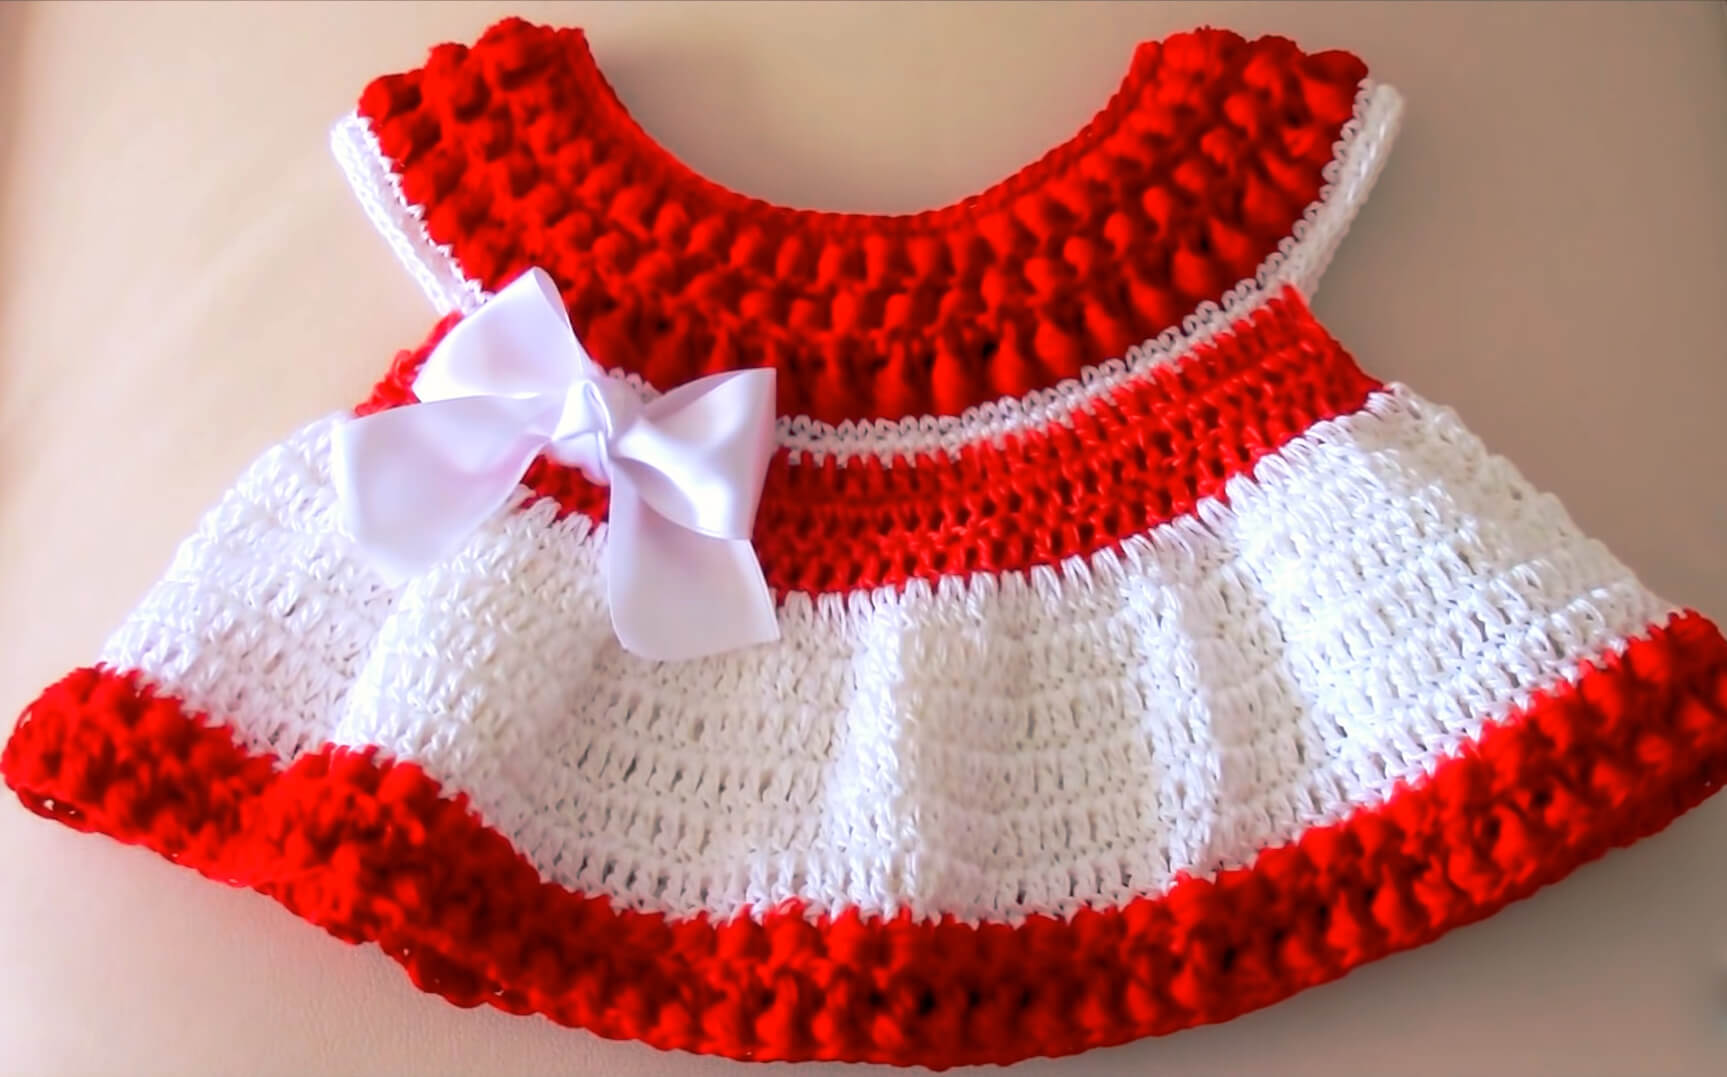 Cute Red & White Frock For Christmas